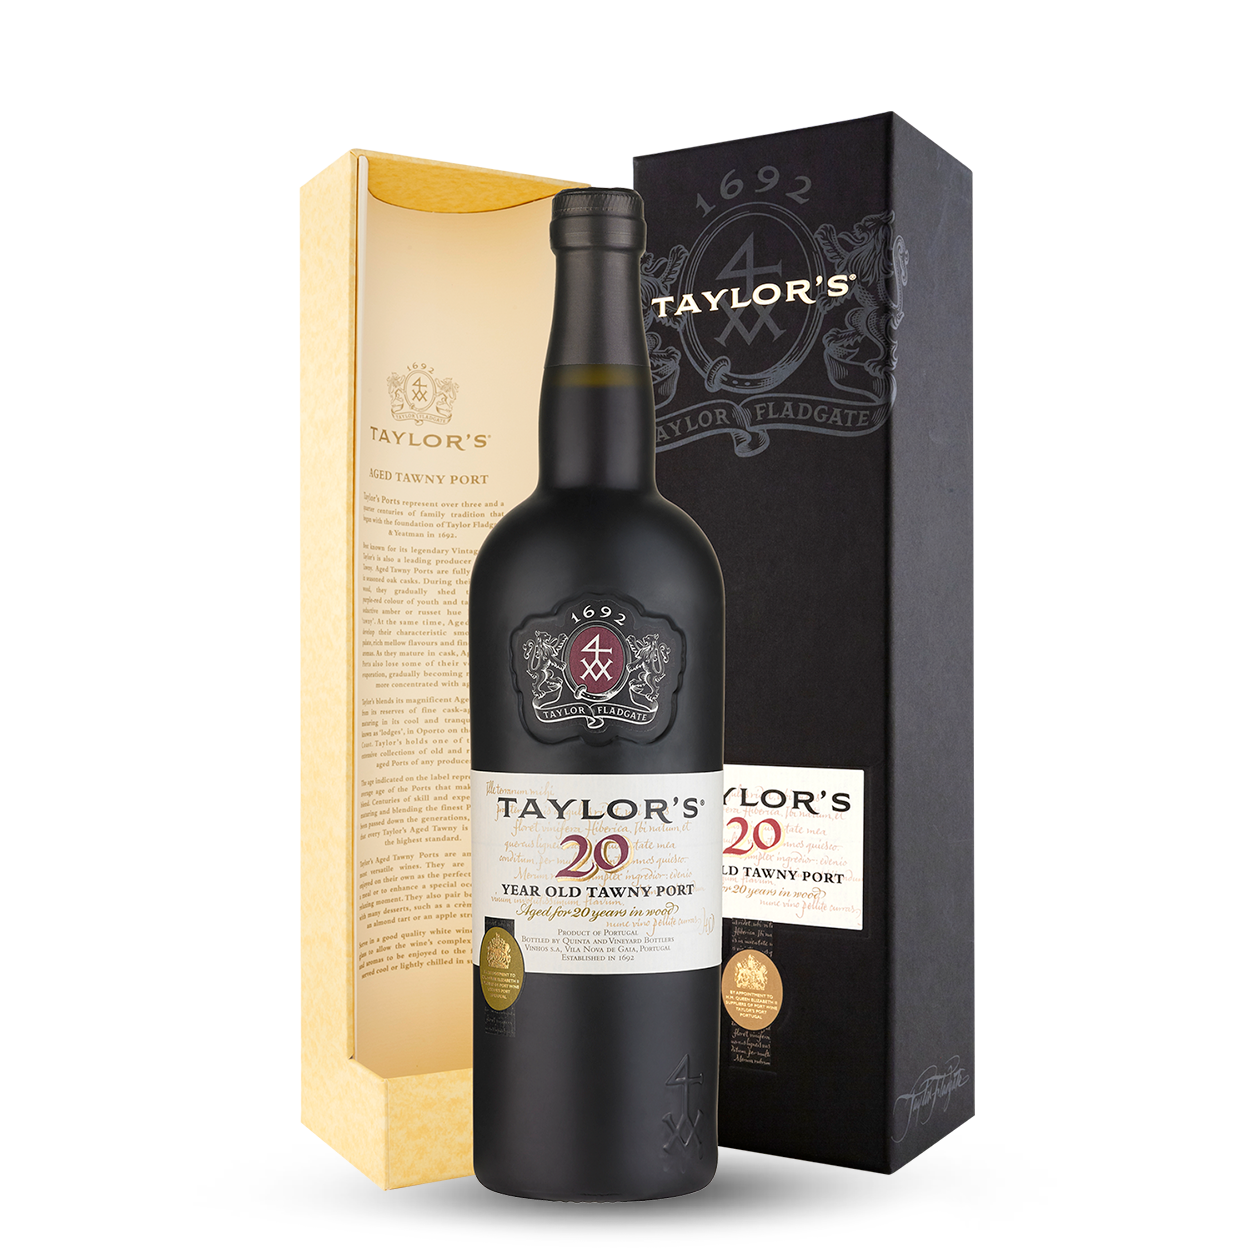 Taylor’s 20 year old Tawny Port